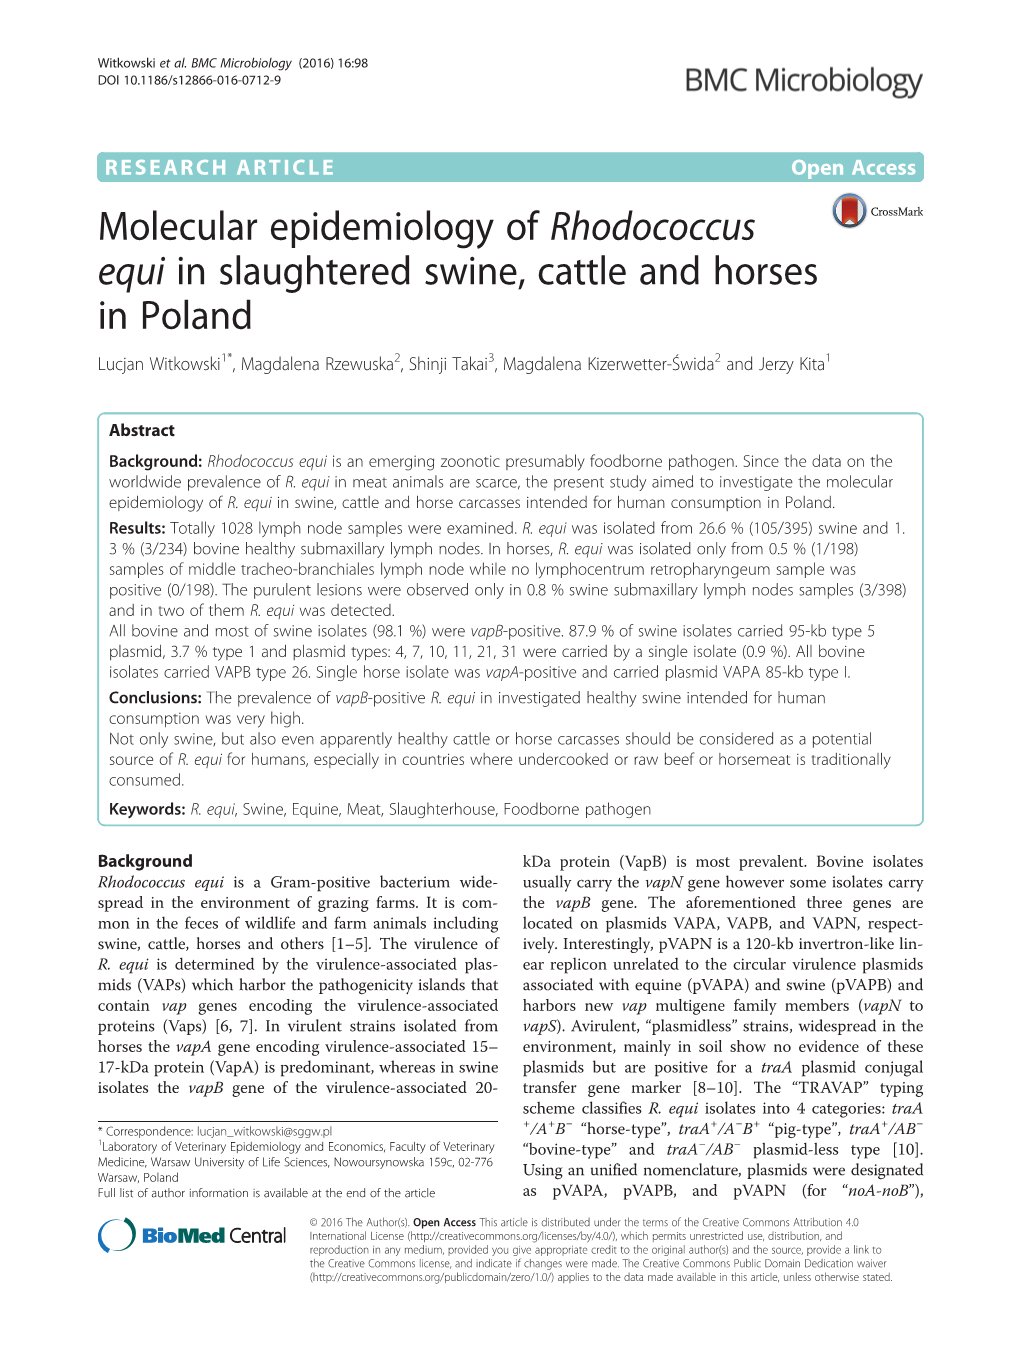 Molecular Epidemiology of Rhodococcus Equi in Slaughtered